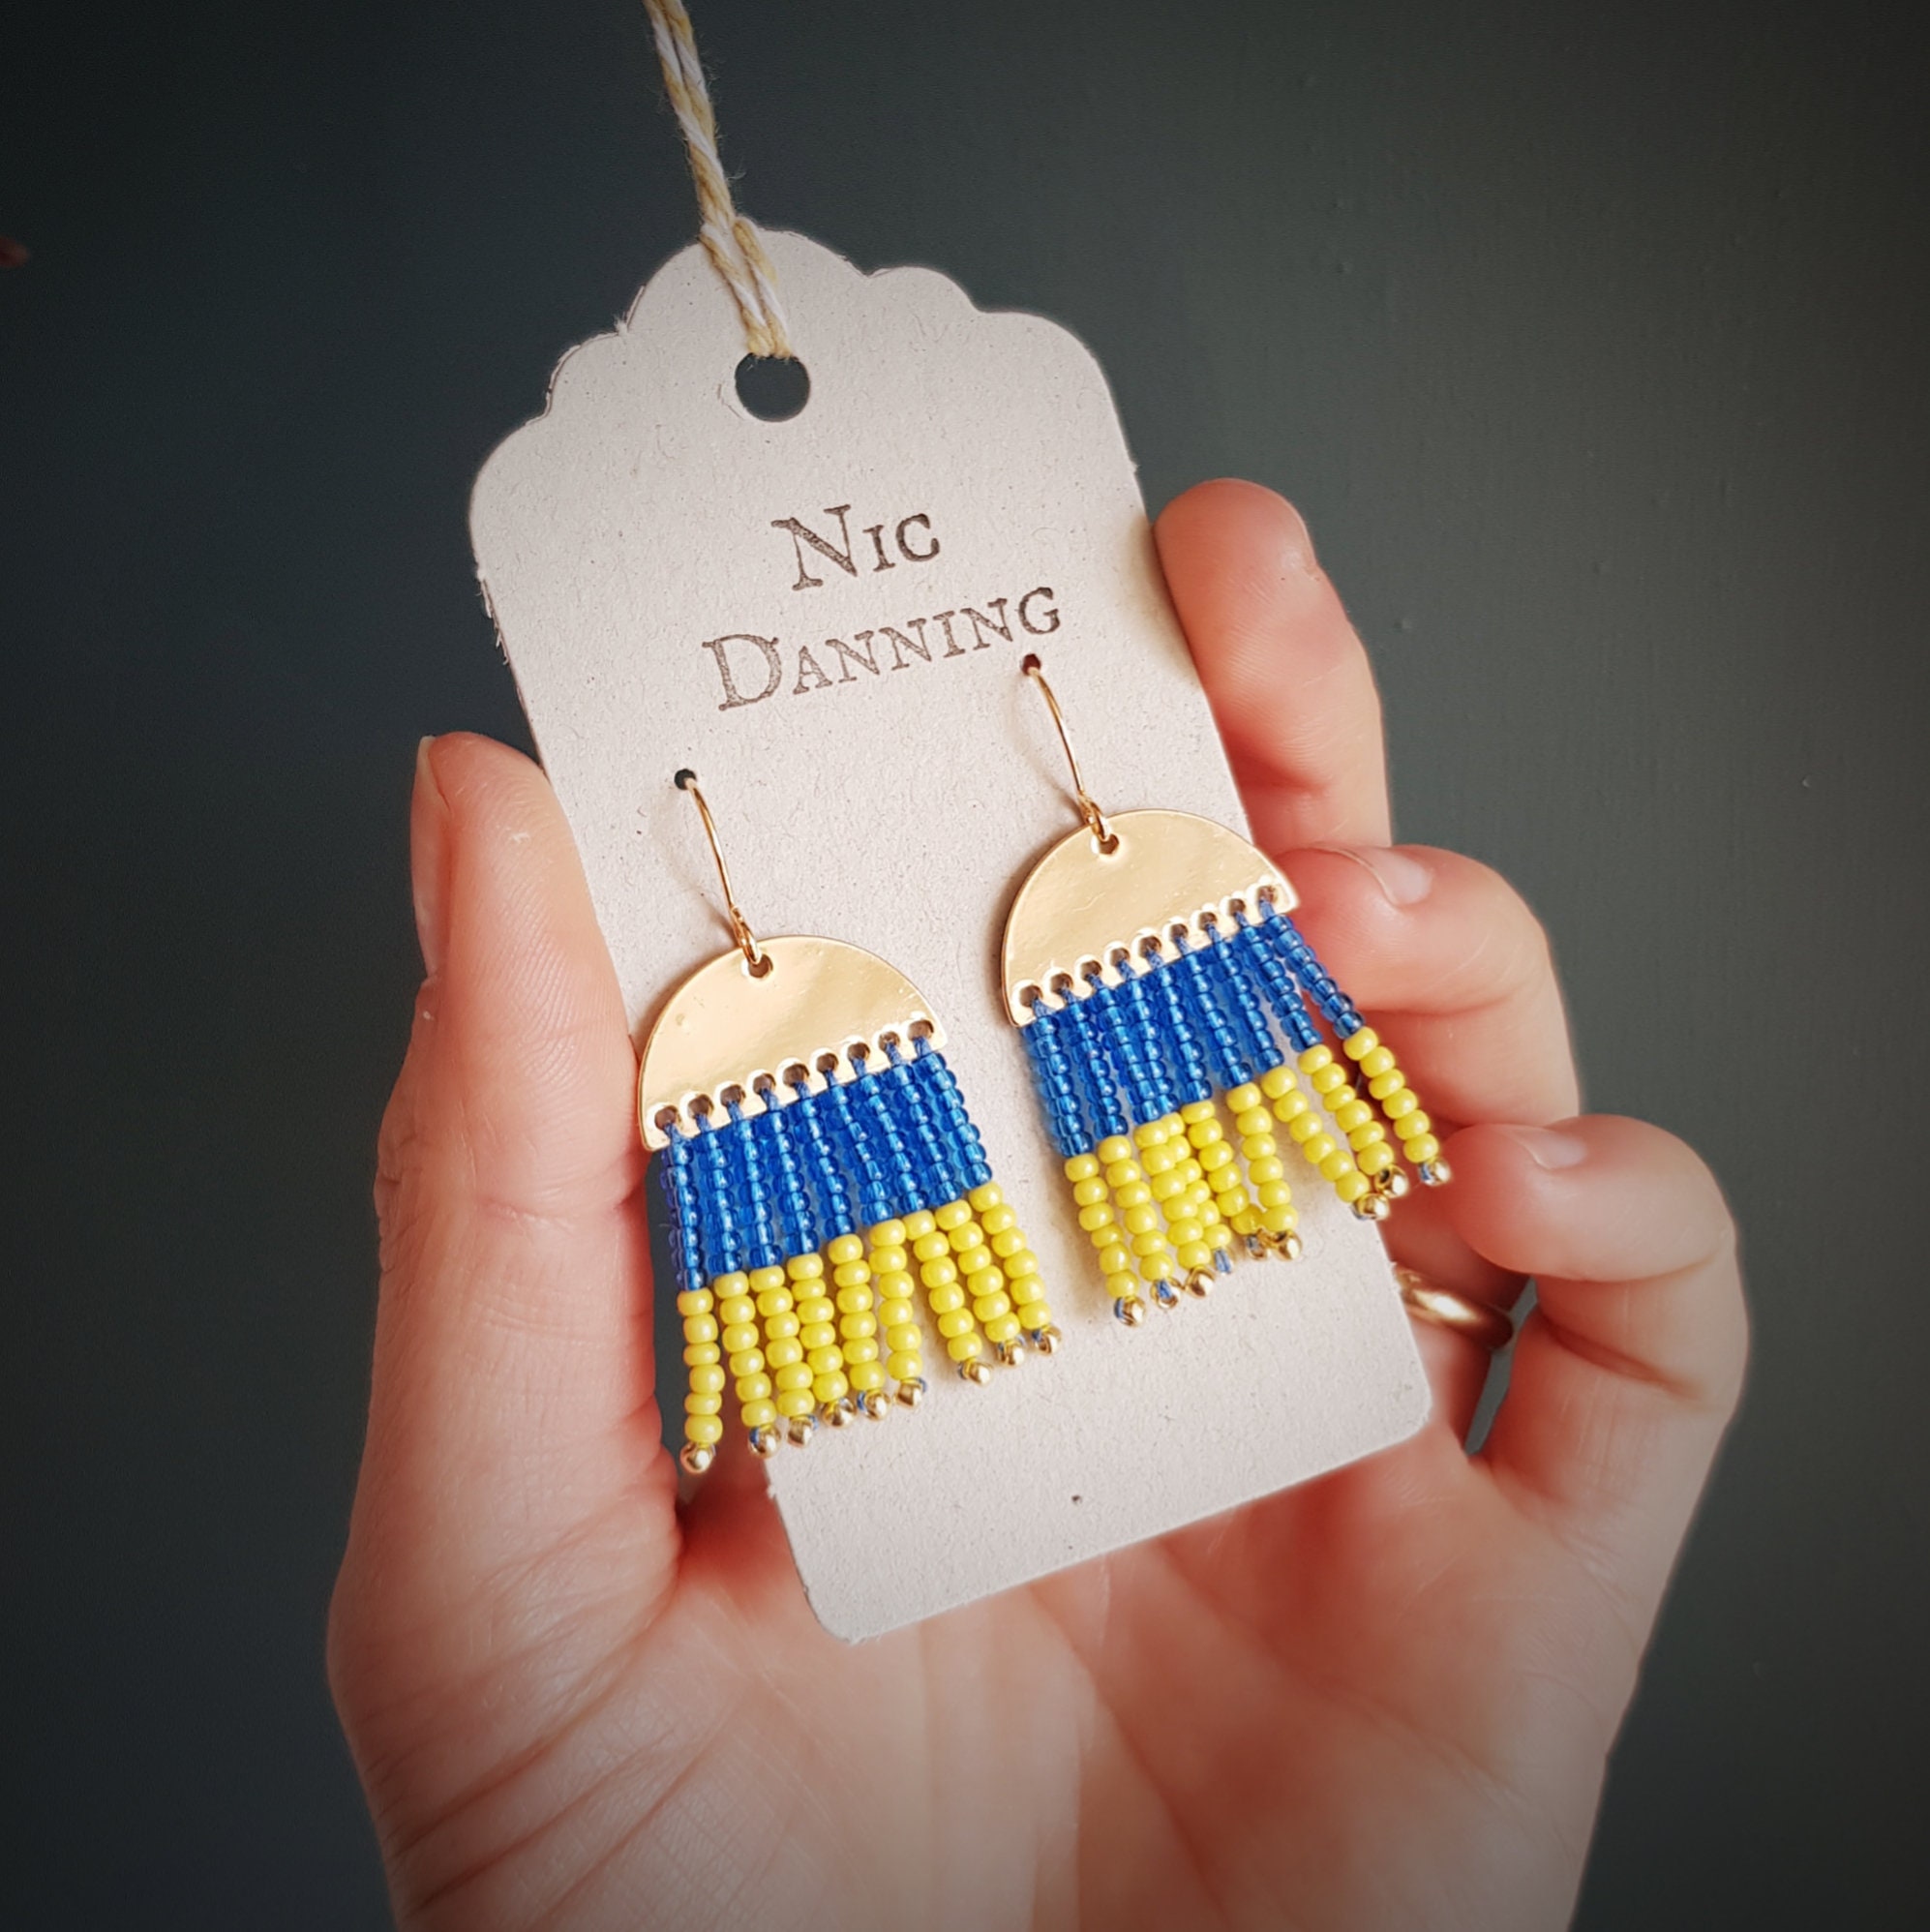 stand With Ukraine. Ten Pounds Per Pair To Shelterbox & Unicef Charities. Handmade in Cornwall, Plastic Free, Beaded Earrings